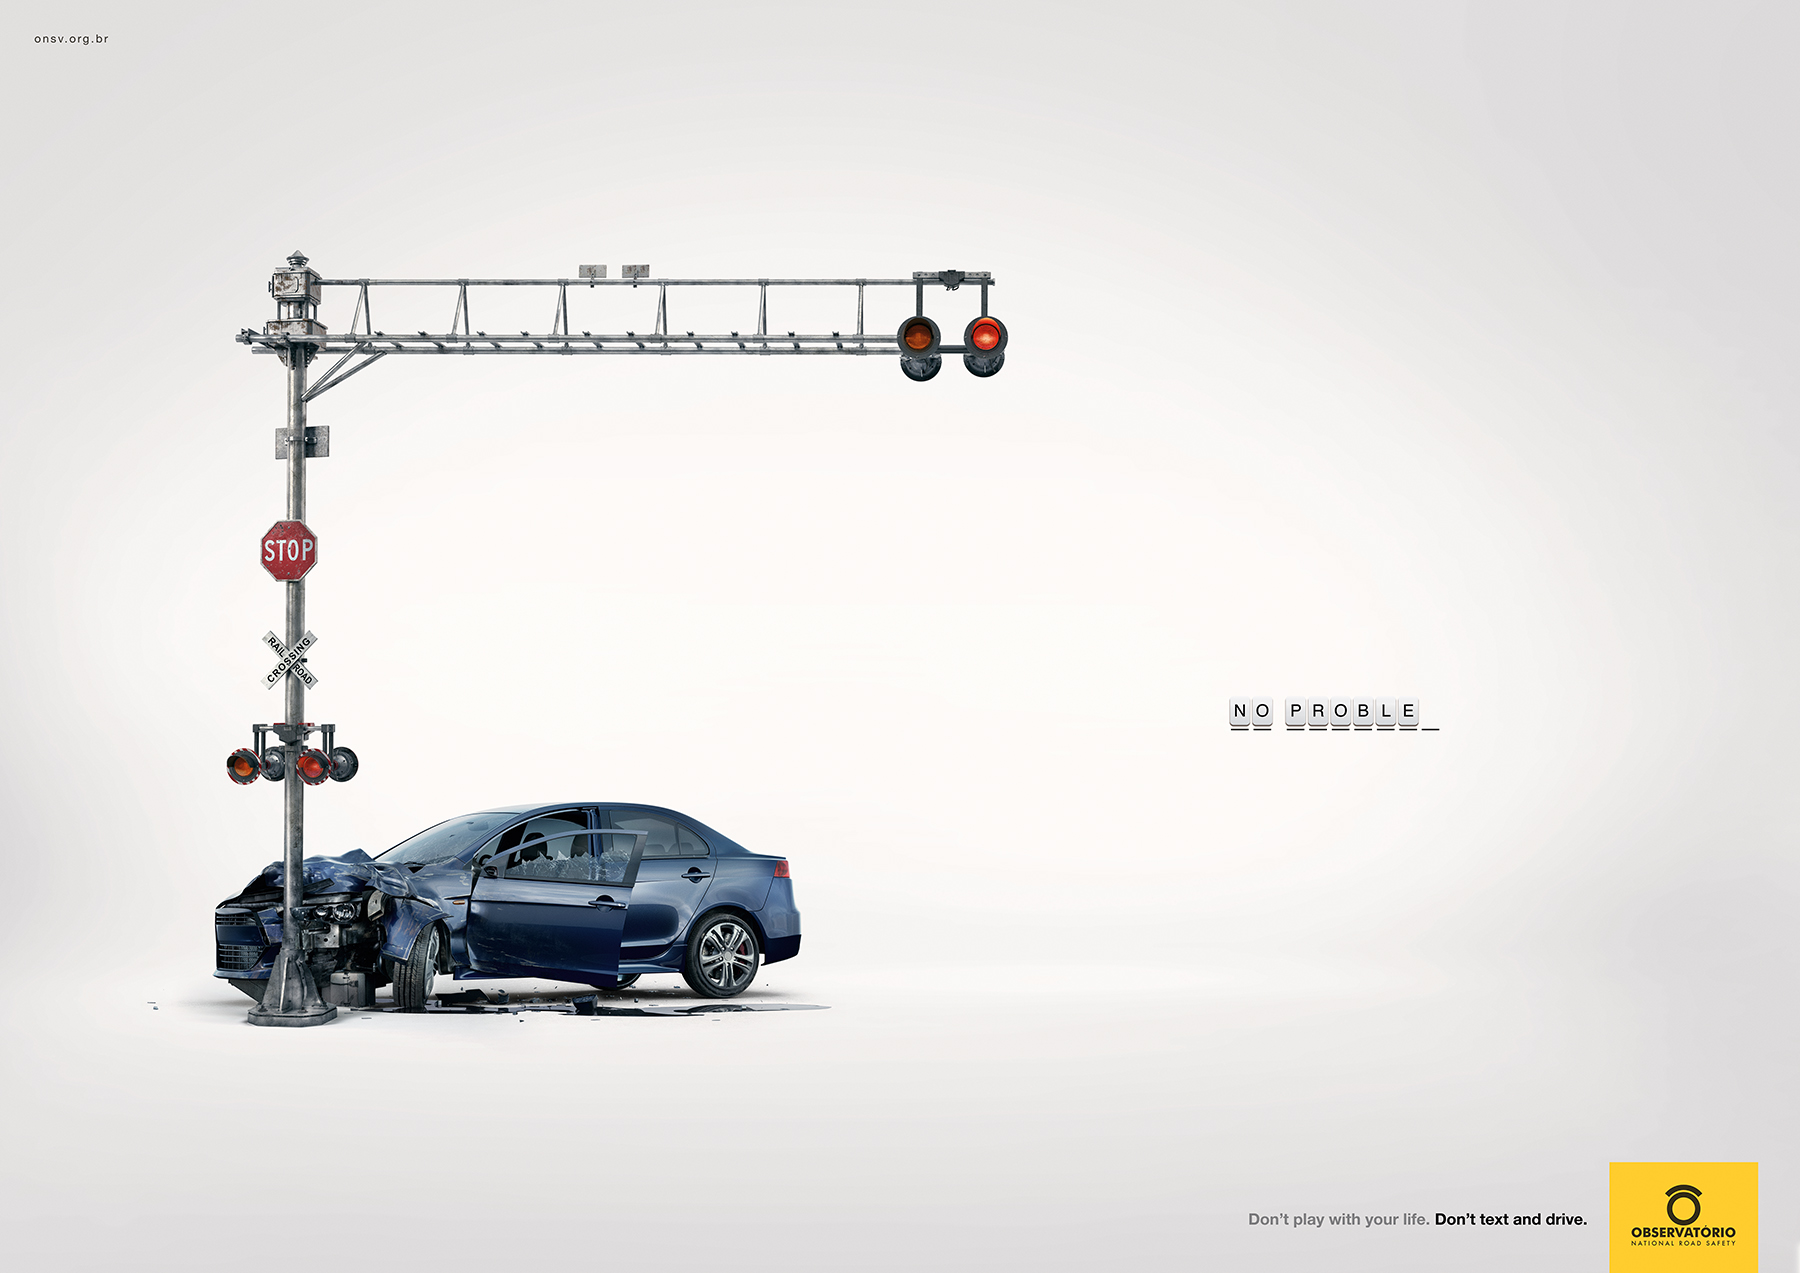 Hangman: Observatorio National Road Safety Campaigns of the World®